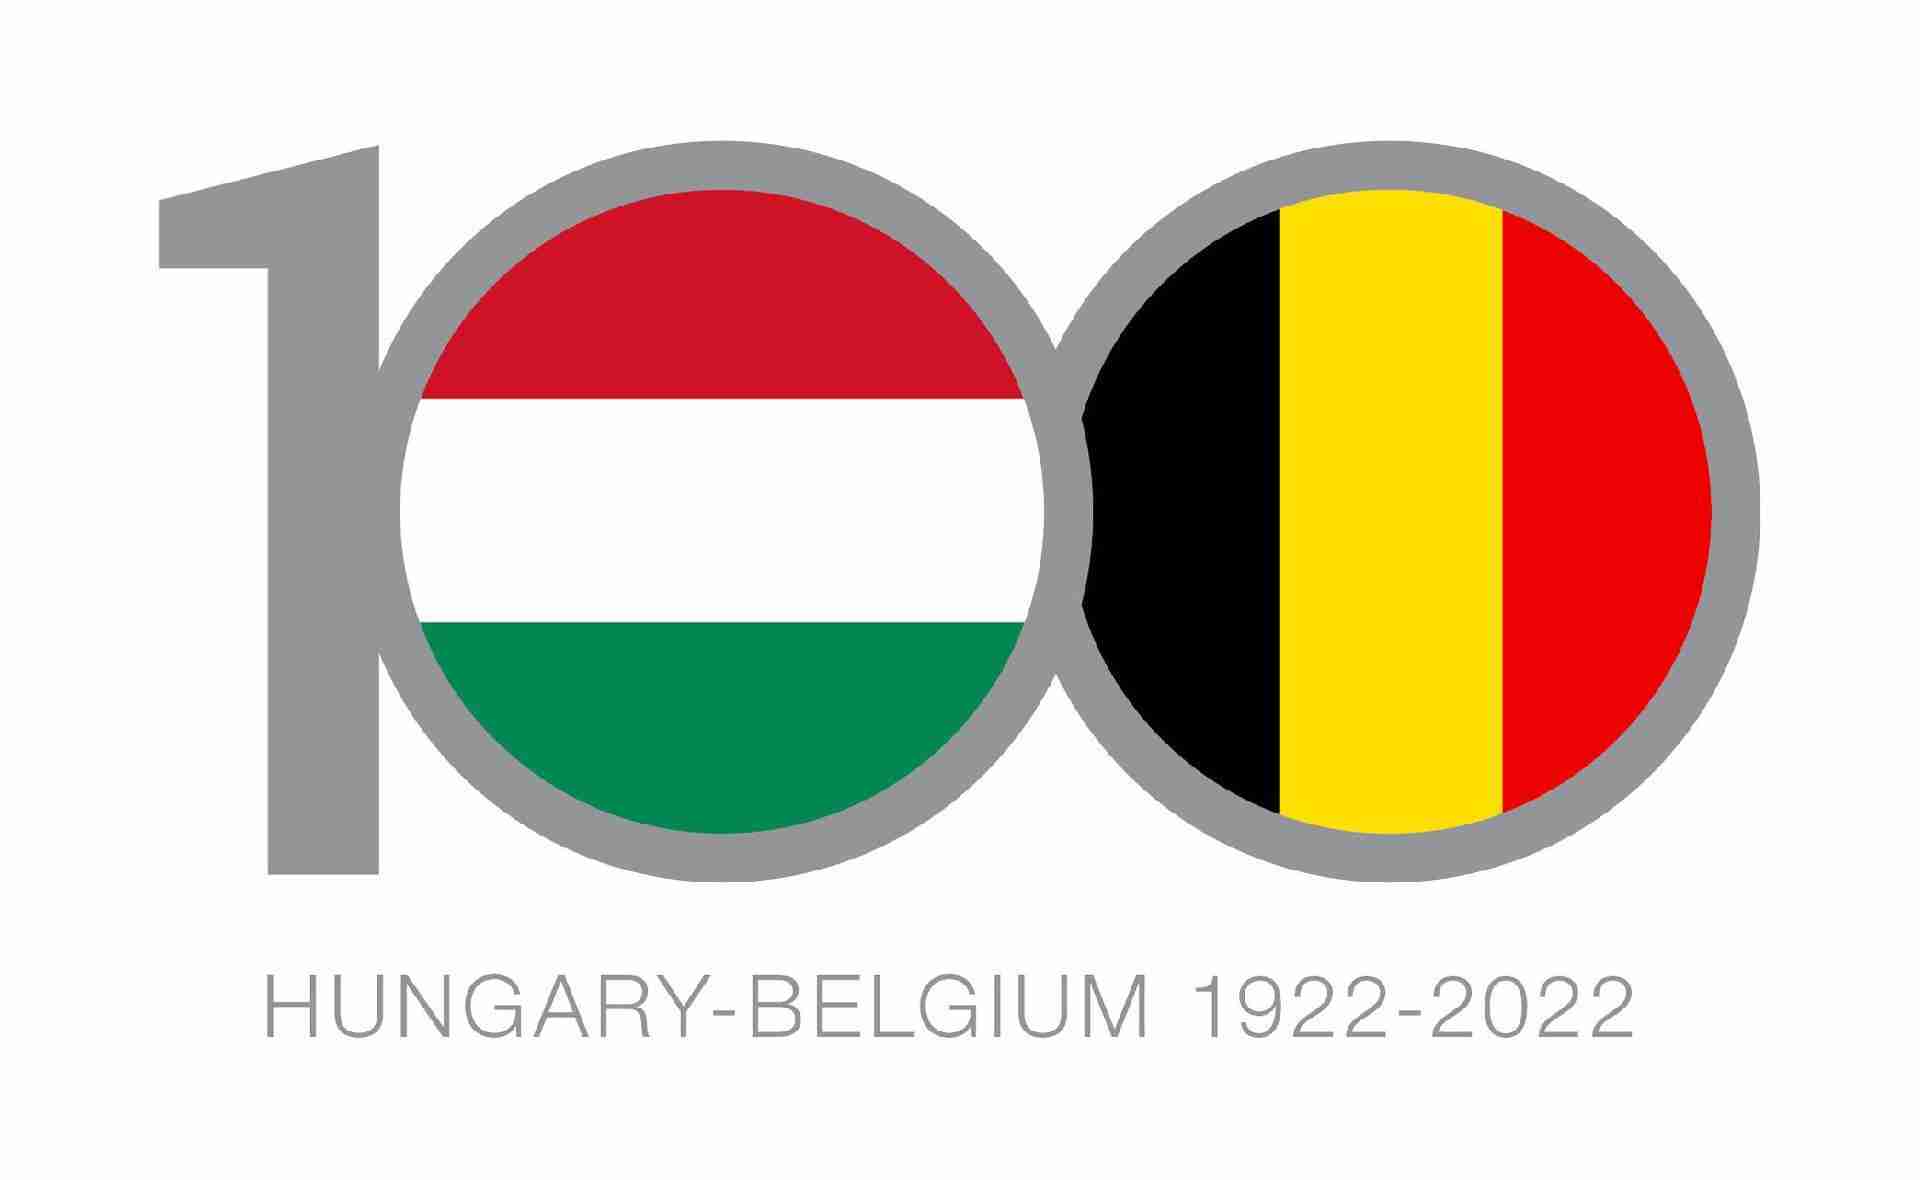 100th anniversary of the diplomatic relationship between Hungary and Belgium